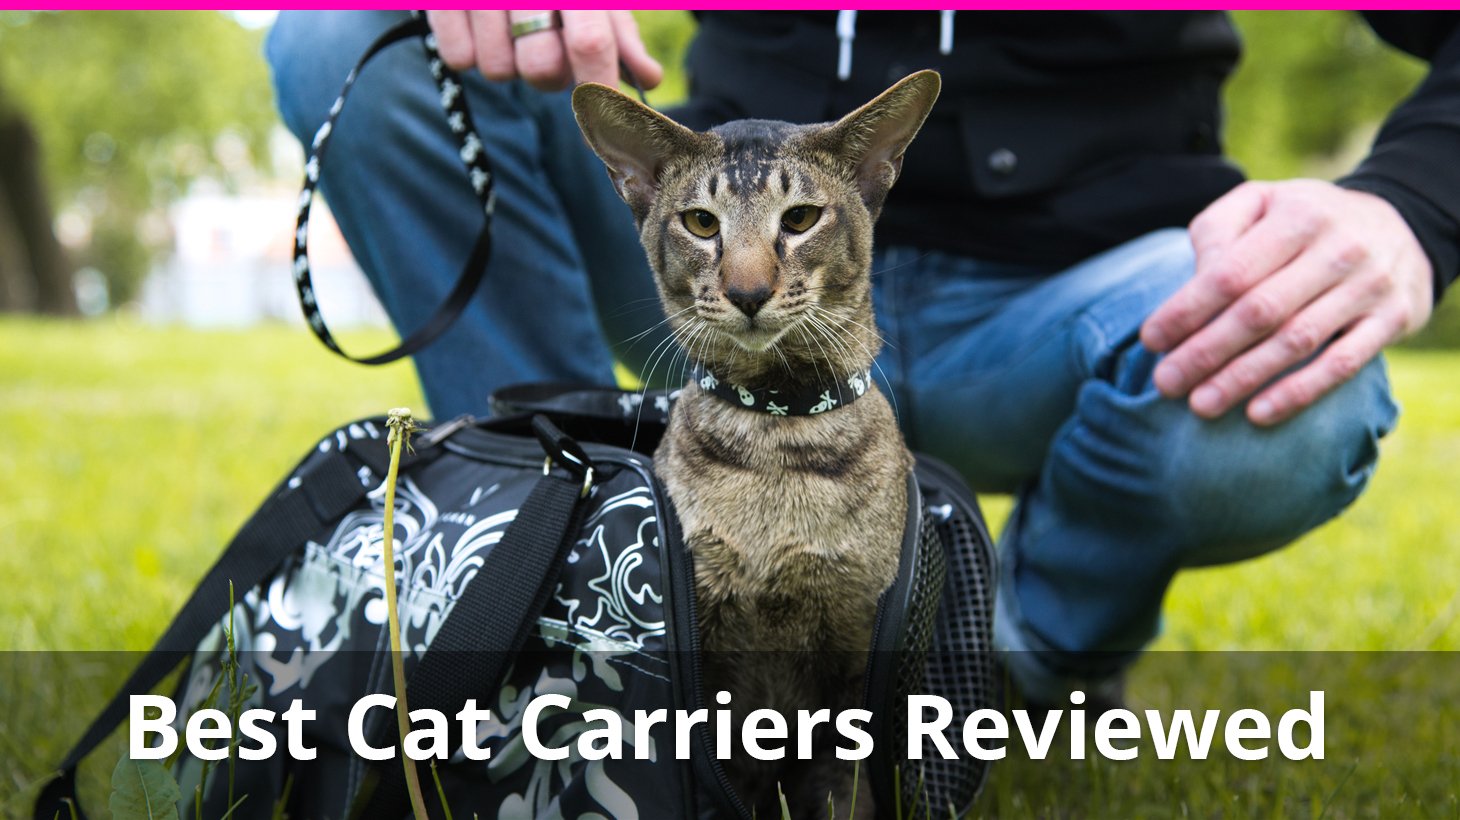 The Best Cat Carriers (Soft & Hard) Ratings and Reviews for 2020